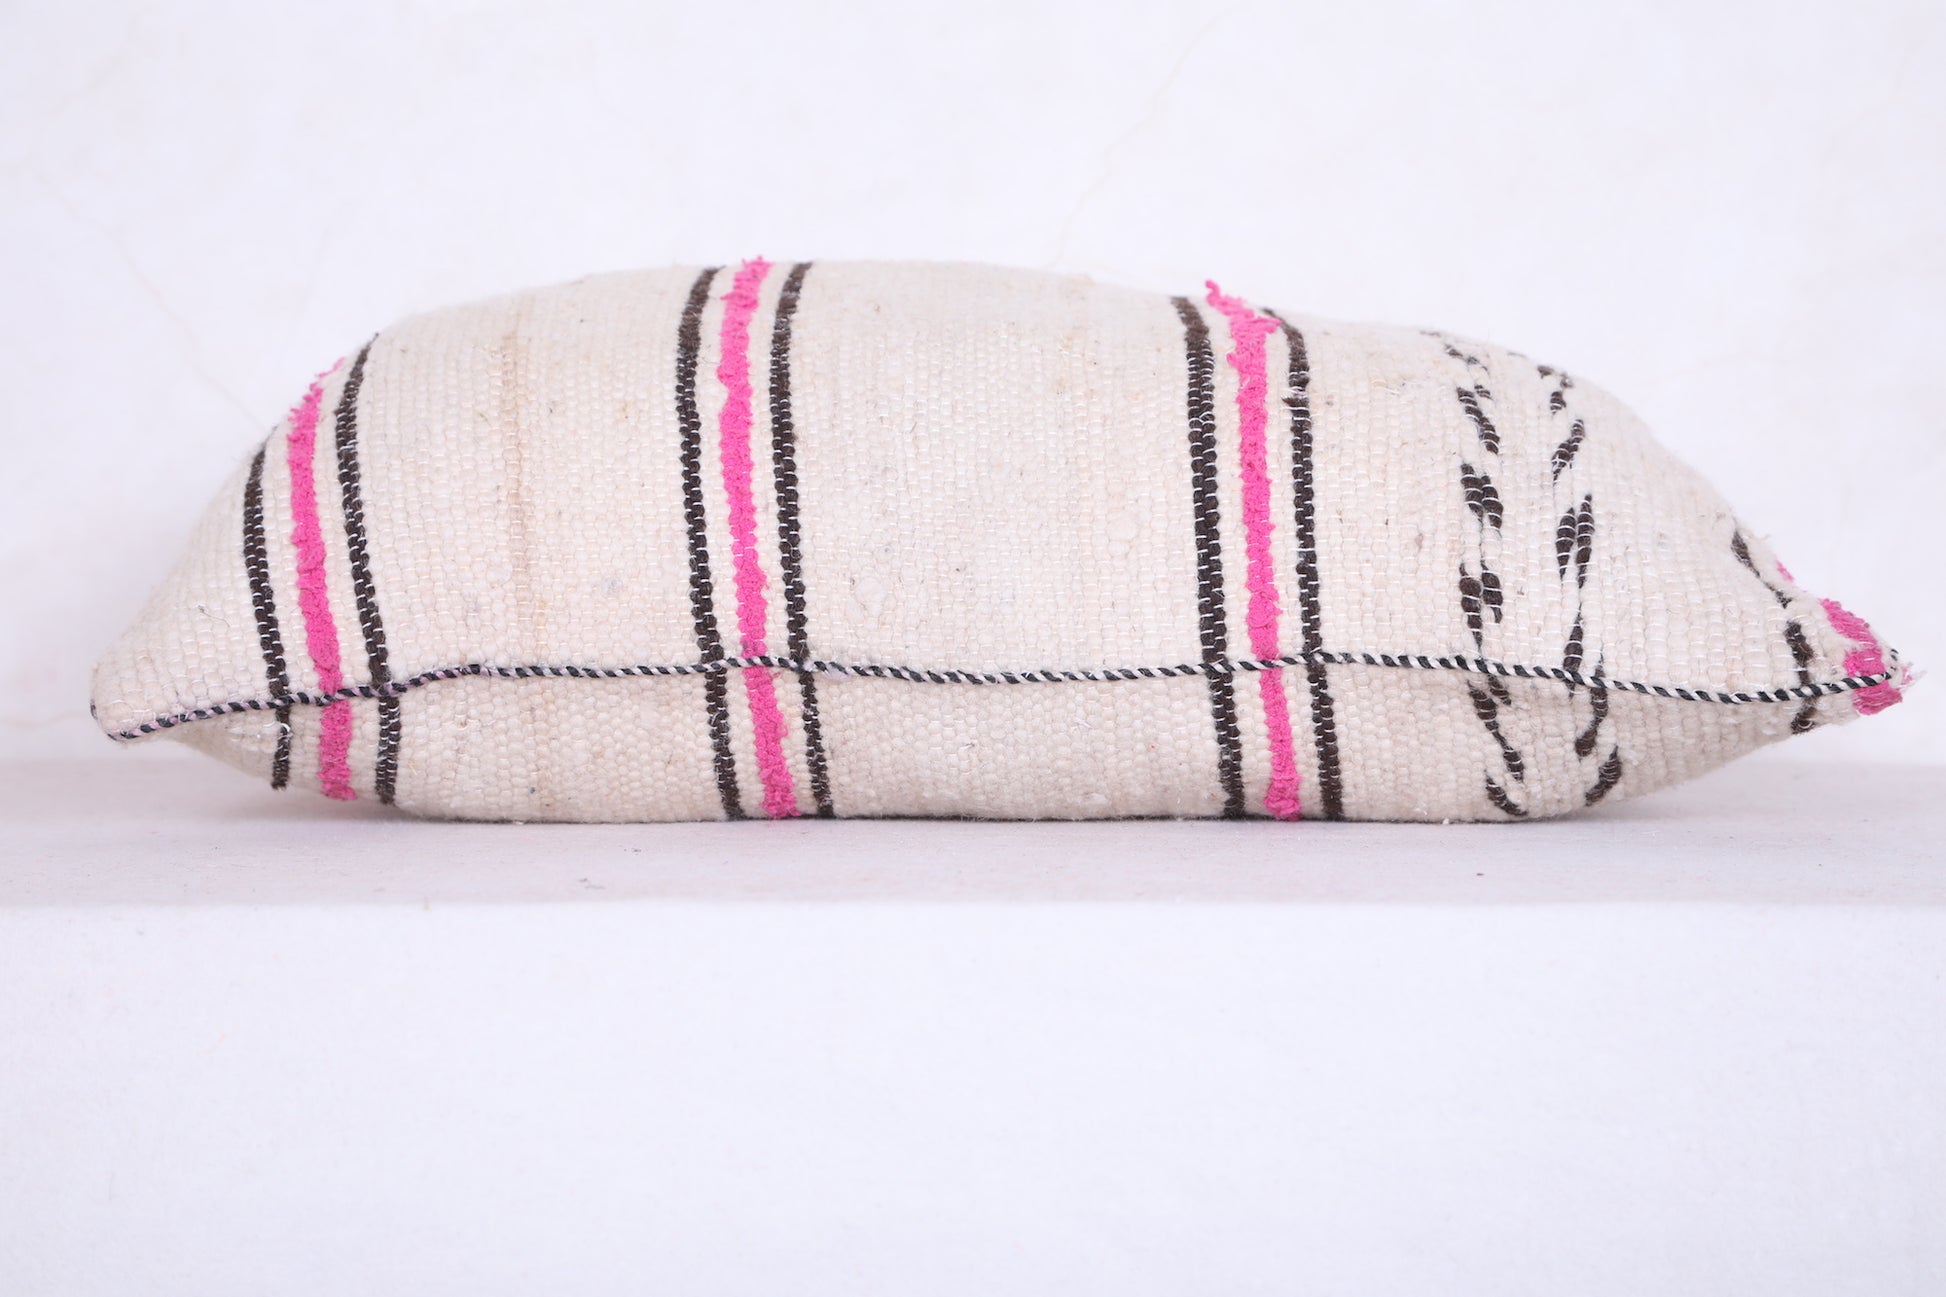 Moroccan handmade kilim pillow 18.5 INCHES X 19.6 INCHES